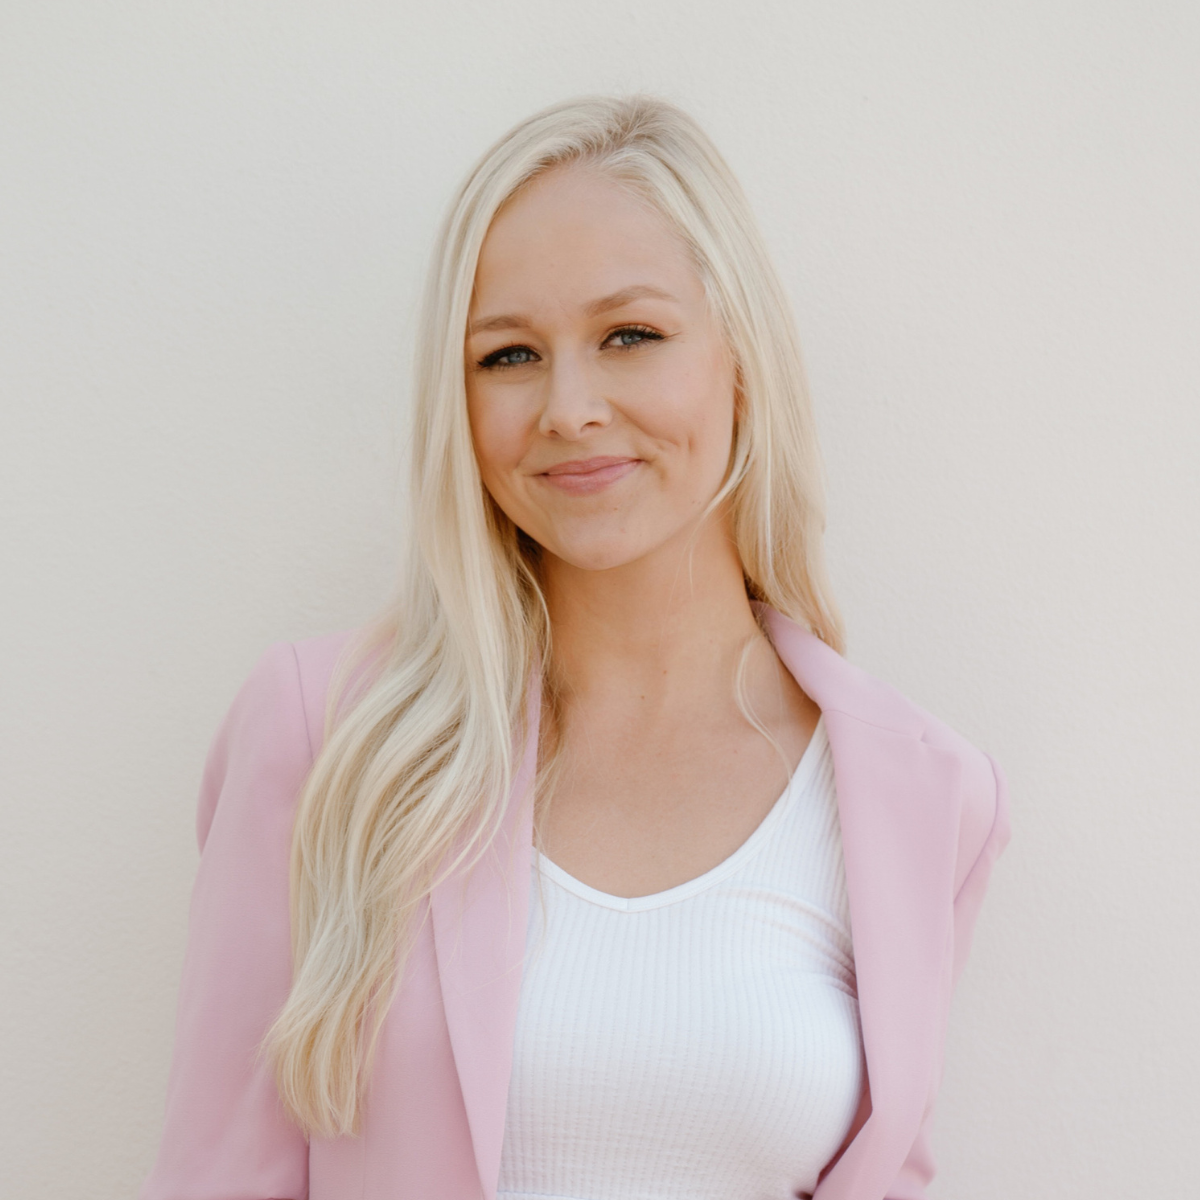 Lexie Smith, CEO and Founder of GROWTH MODE and Co-Founder of Ready Set Coach